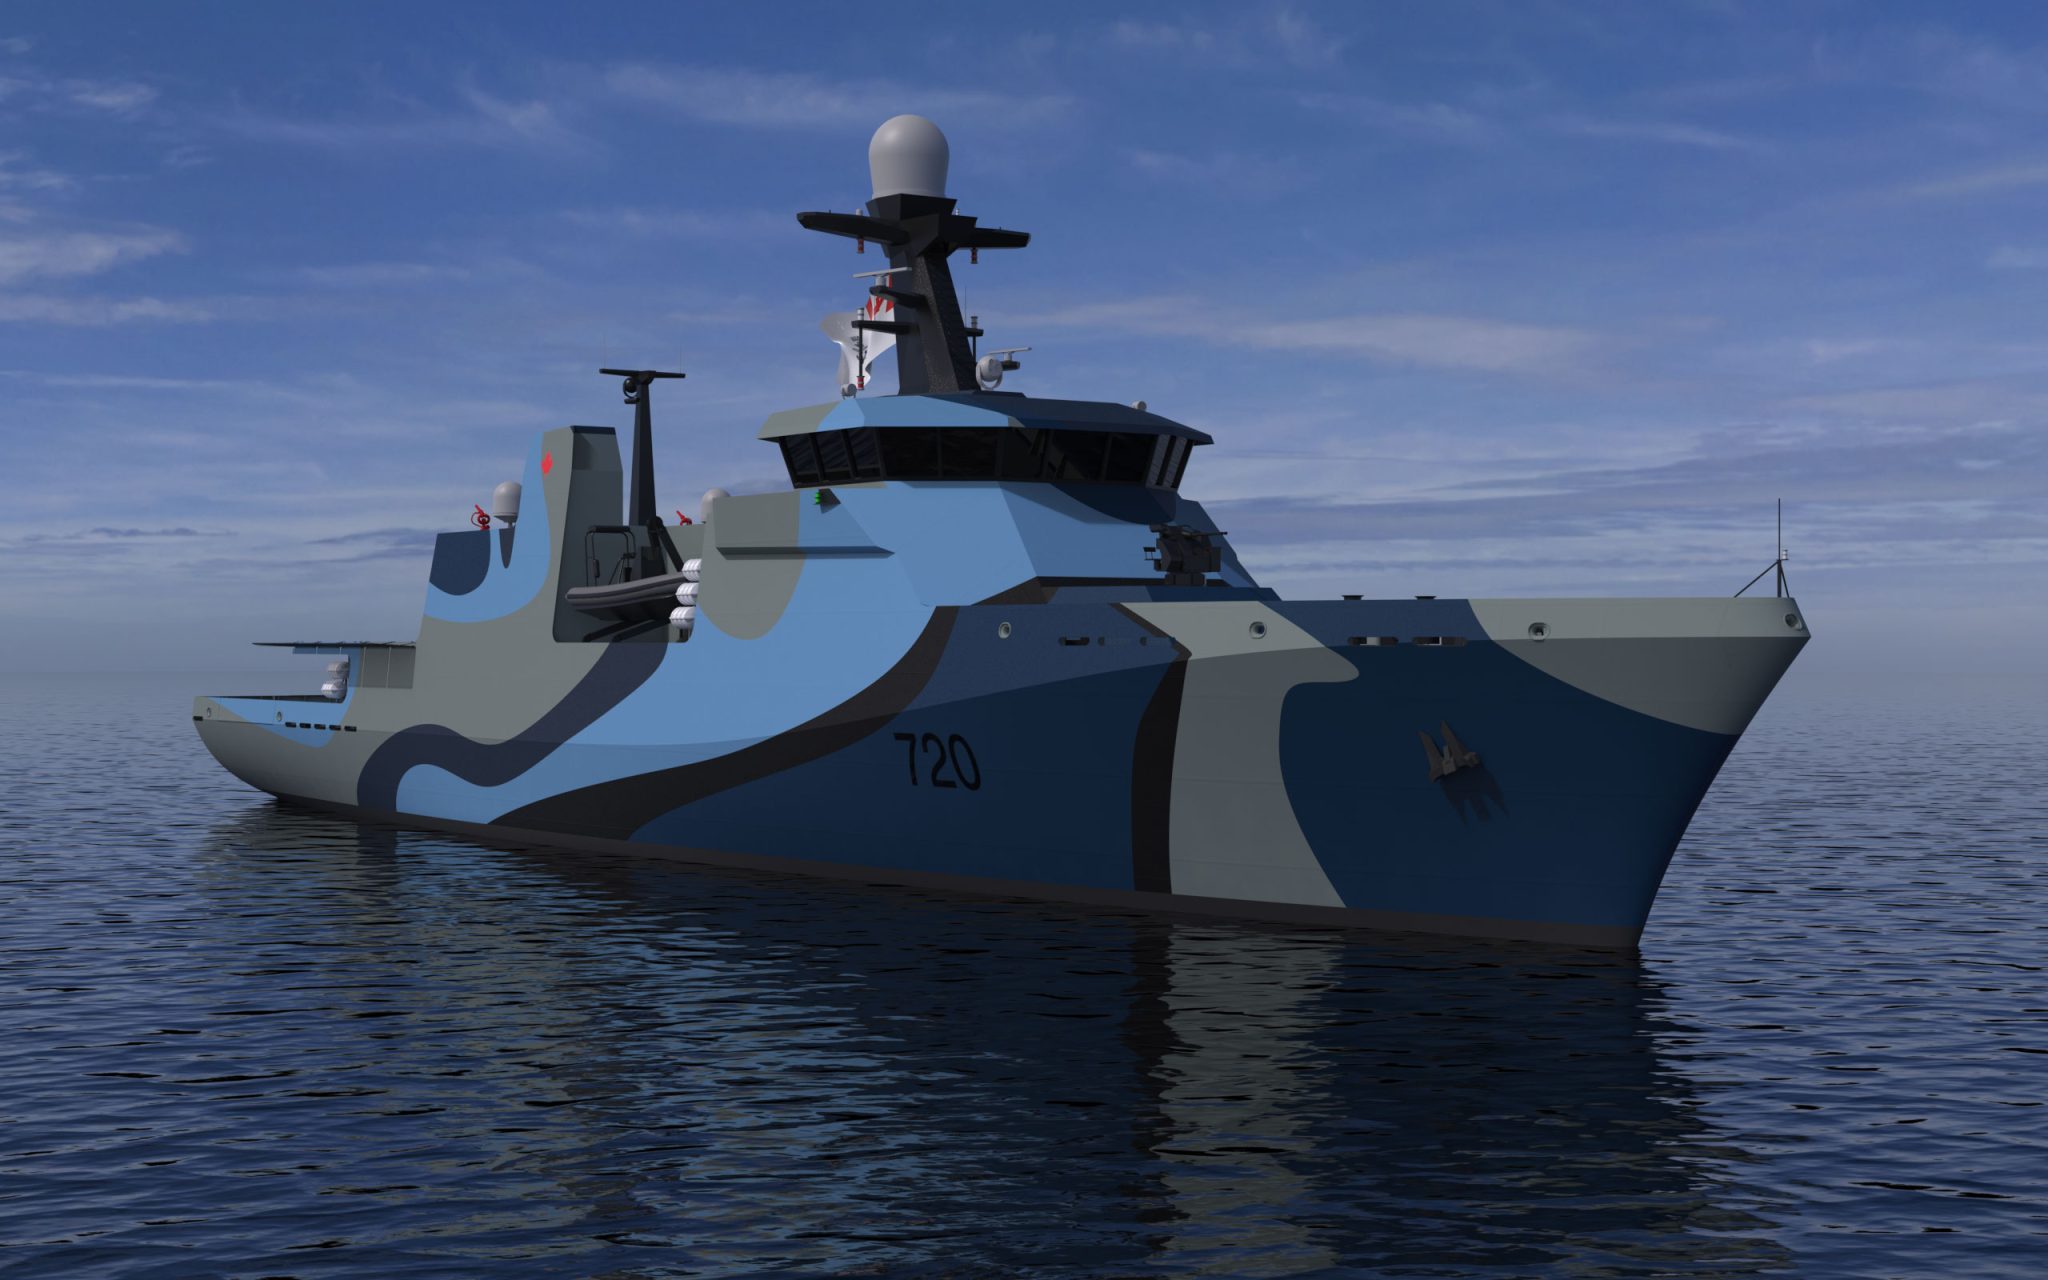 Vard Marine, Heddle Shipyards, and American Bureau of Shipping Canada, announce a new initiative in support of the Vigilance next generation offshore patrol vessel